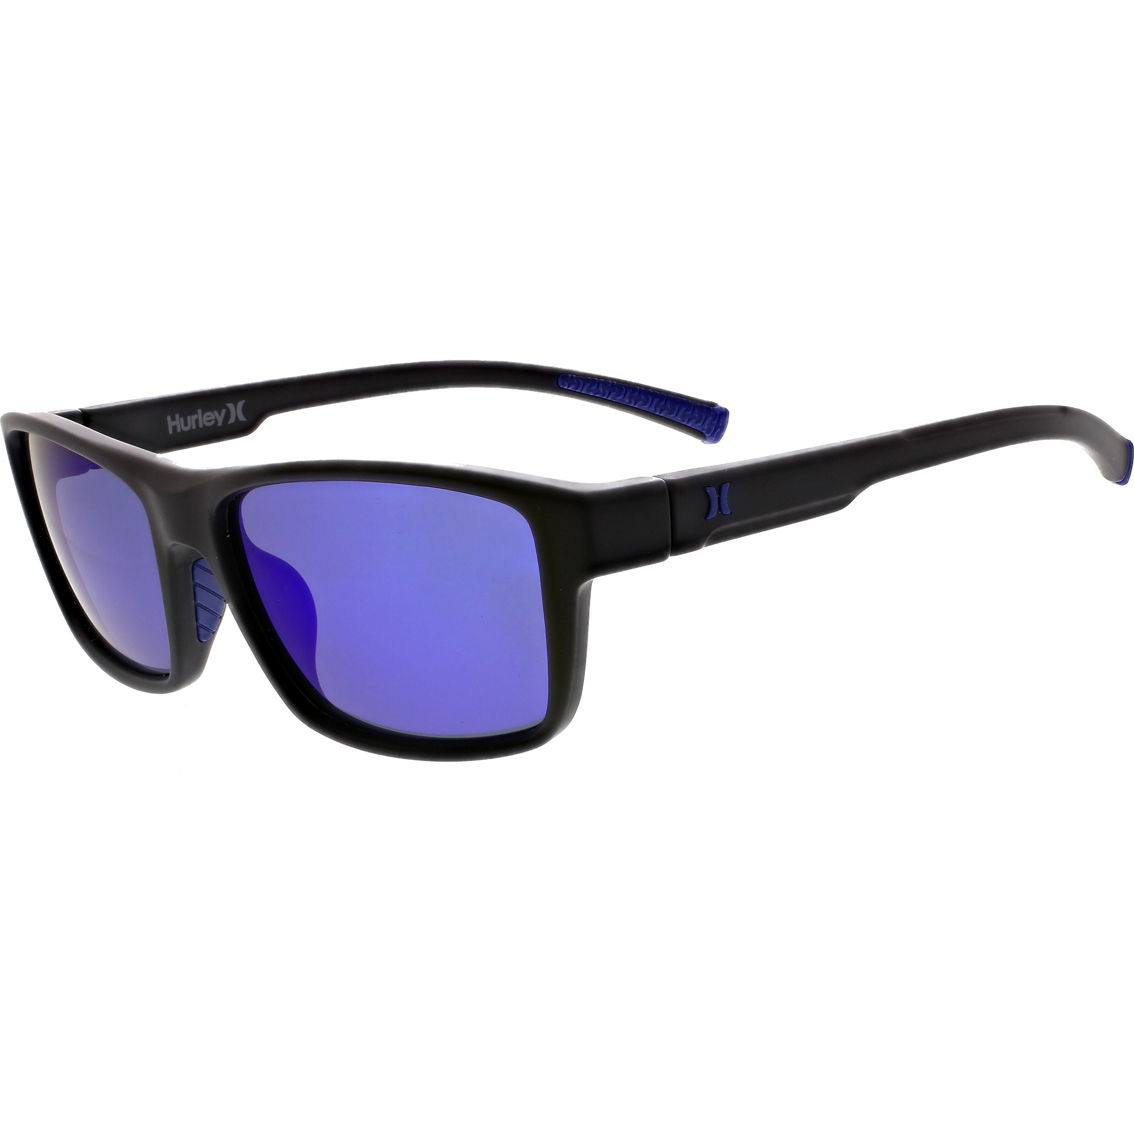 Hurley Rescue Rectangle Polarized Floating Sunglasses Hsmk1000p 002, Sunglasses, Clothing & Accessories